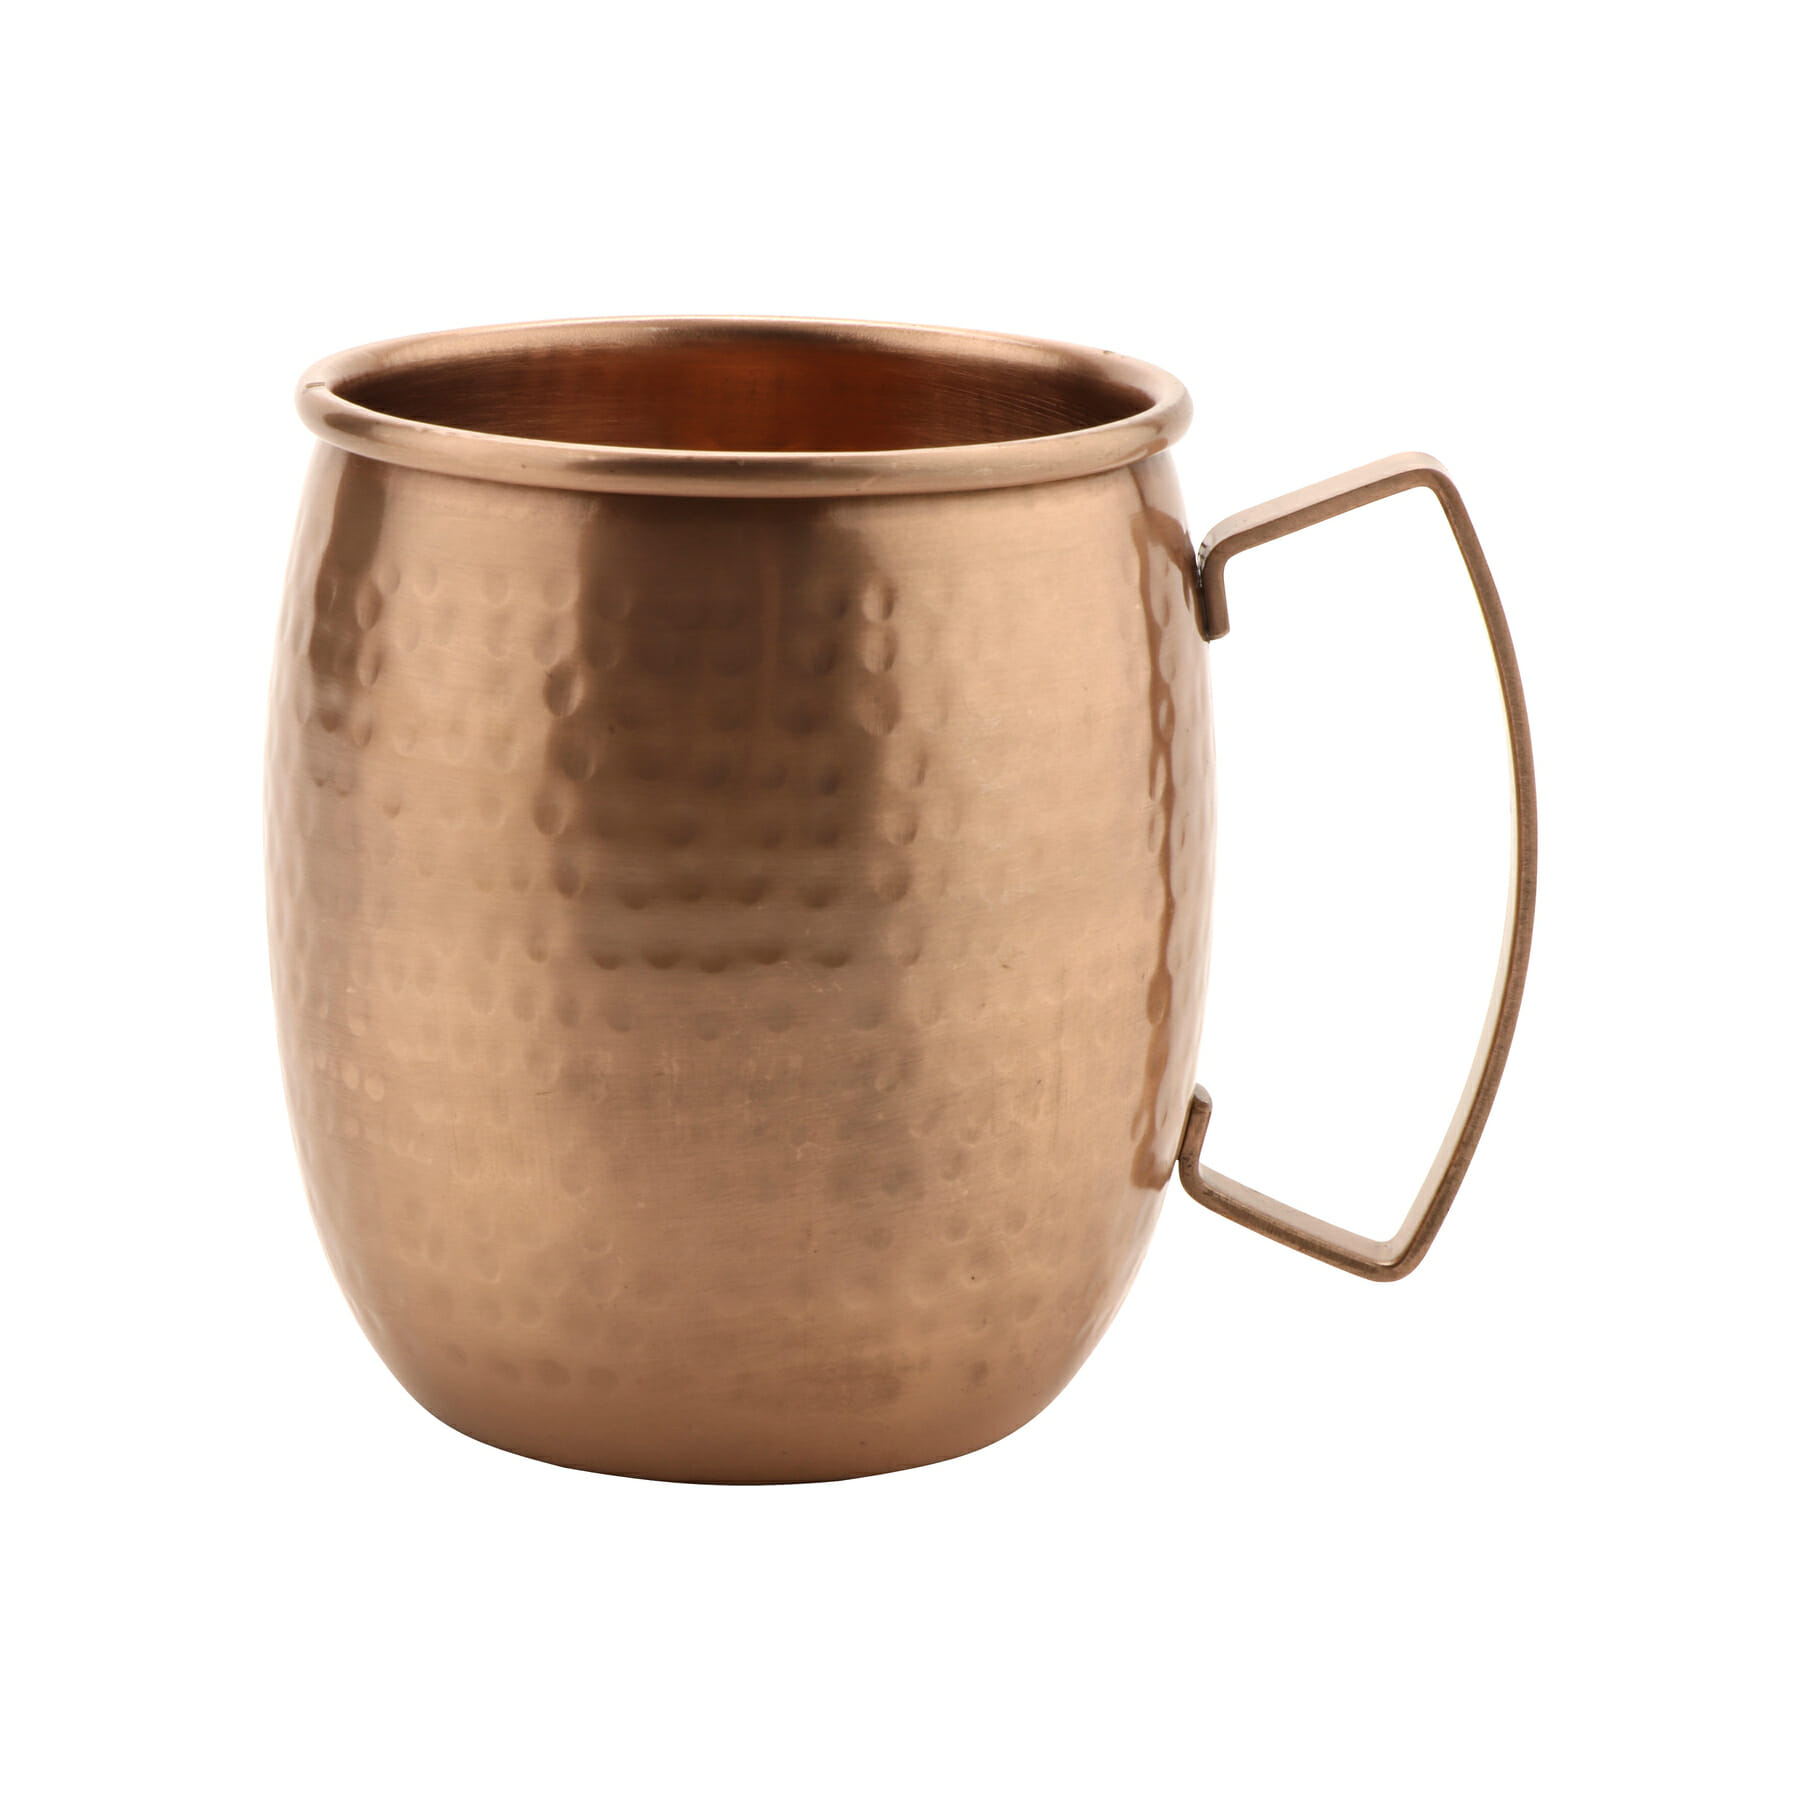 16 oz. Double Wall Hammered Copper Tumbler (4-Pack), Brown